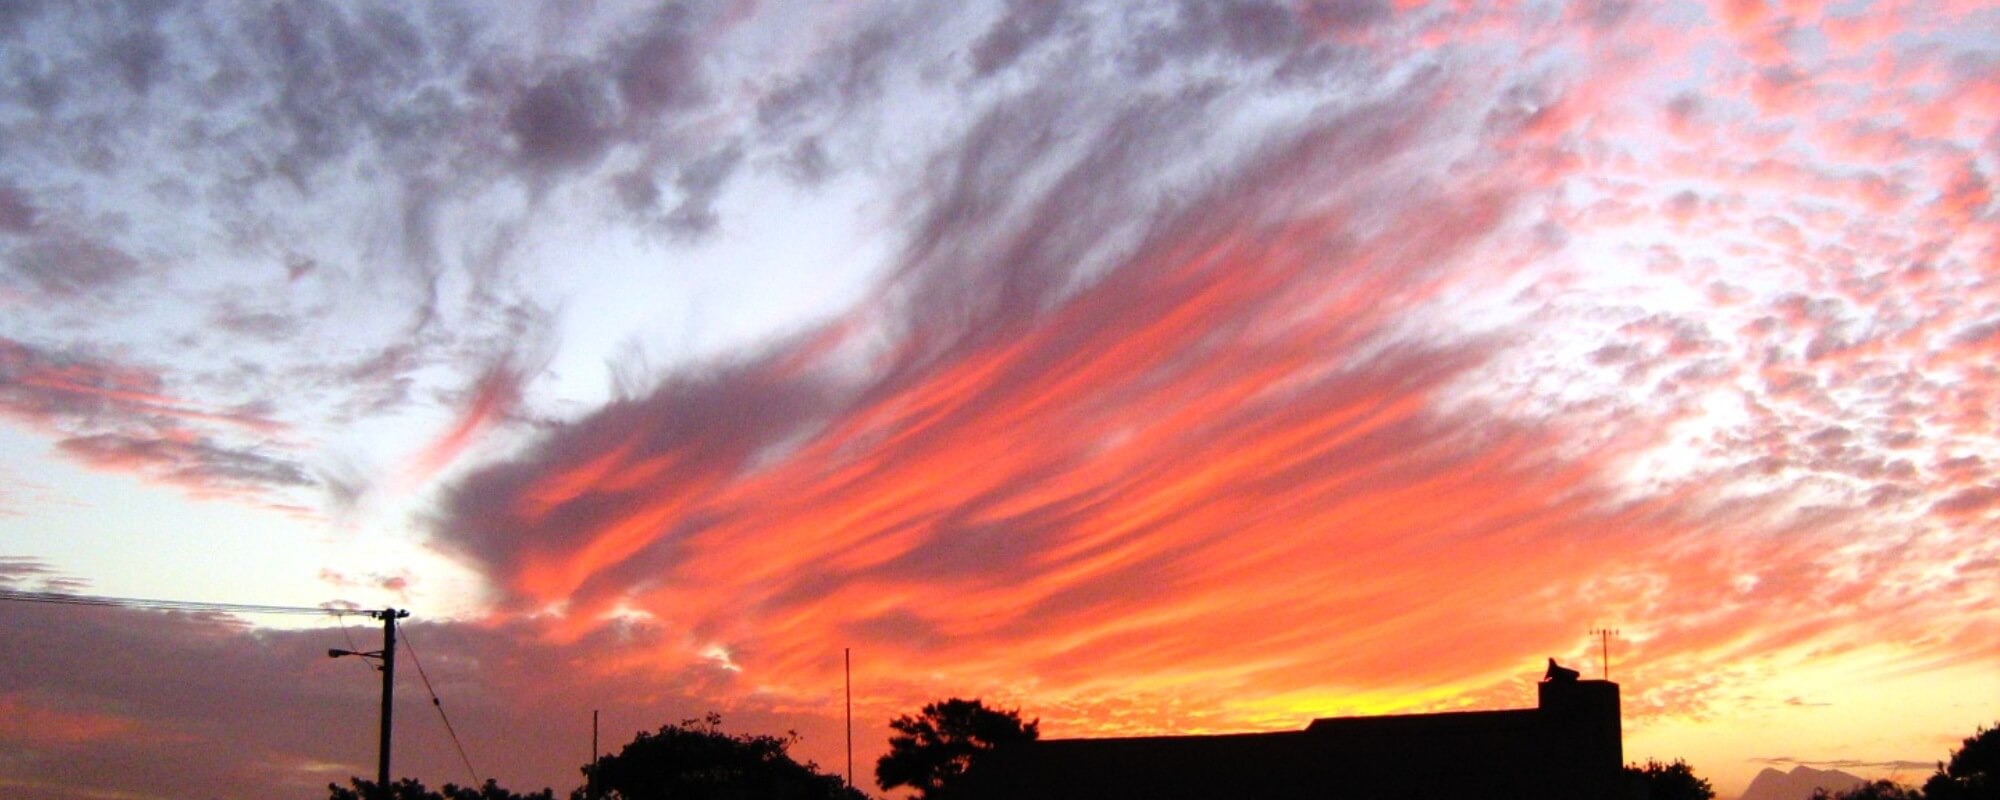 South African Sunset Painted By The Master Scientist